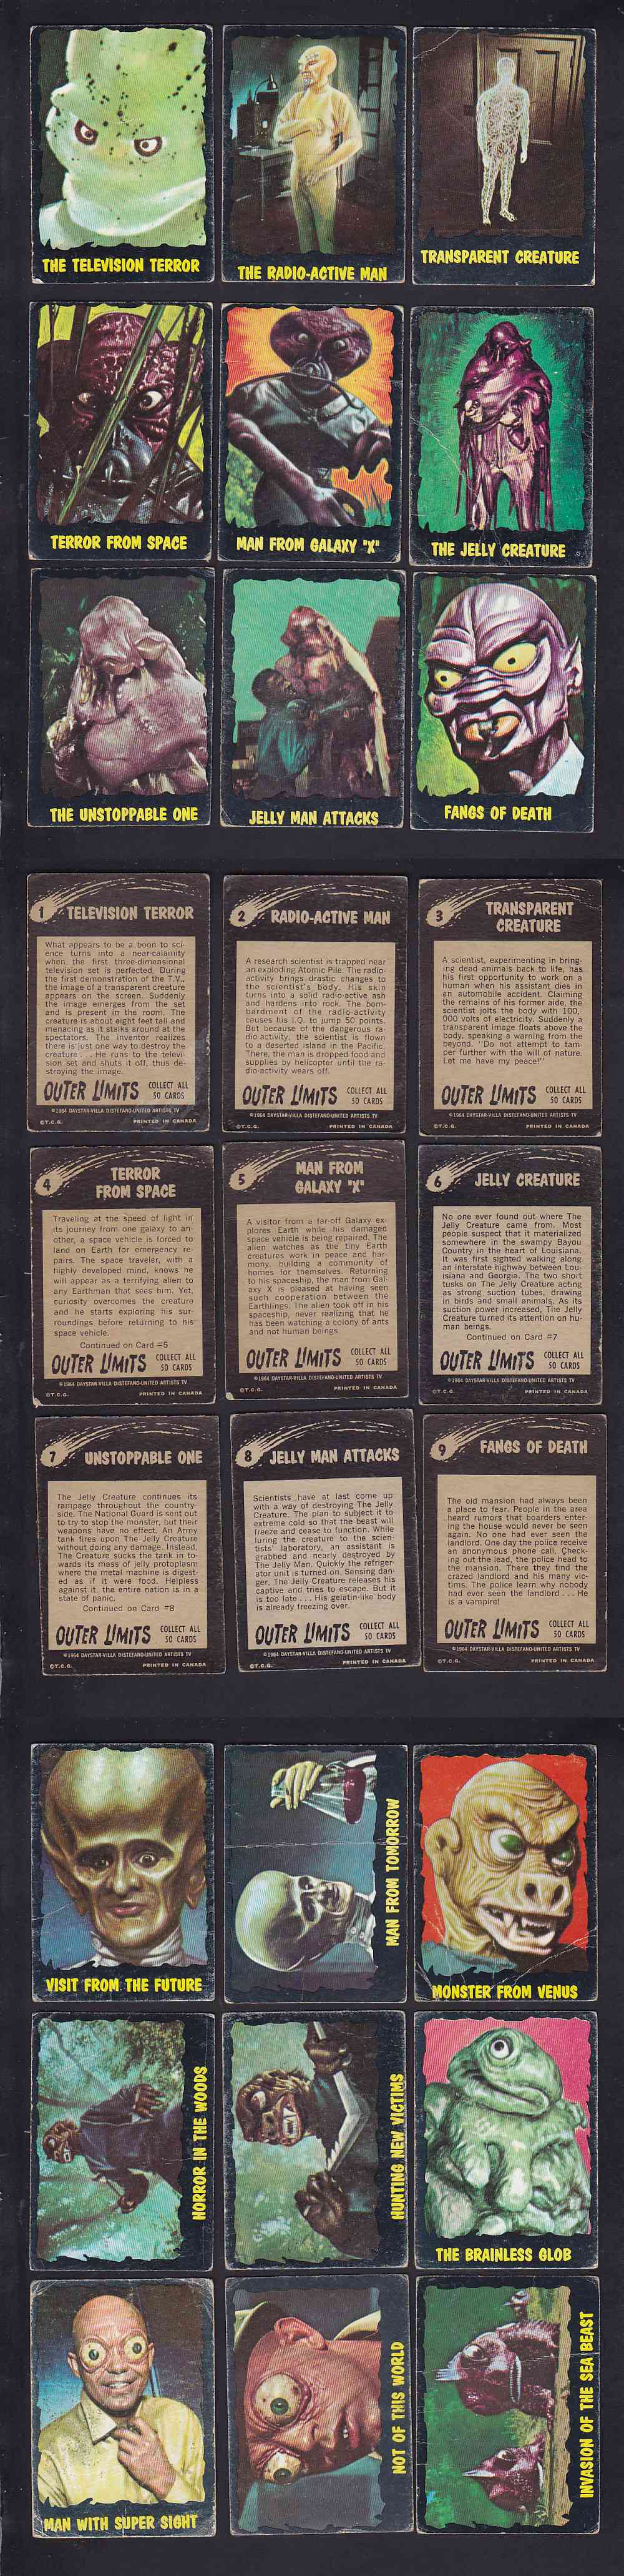 1964 TOPPS OUTER LIMITS CARD FULL SET 50/50 photo